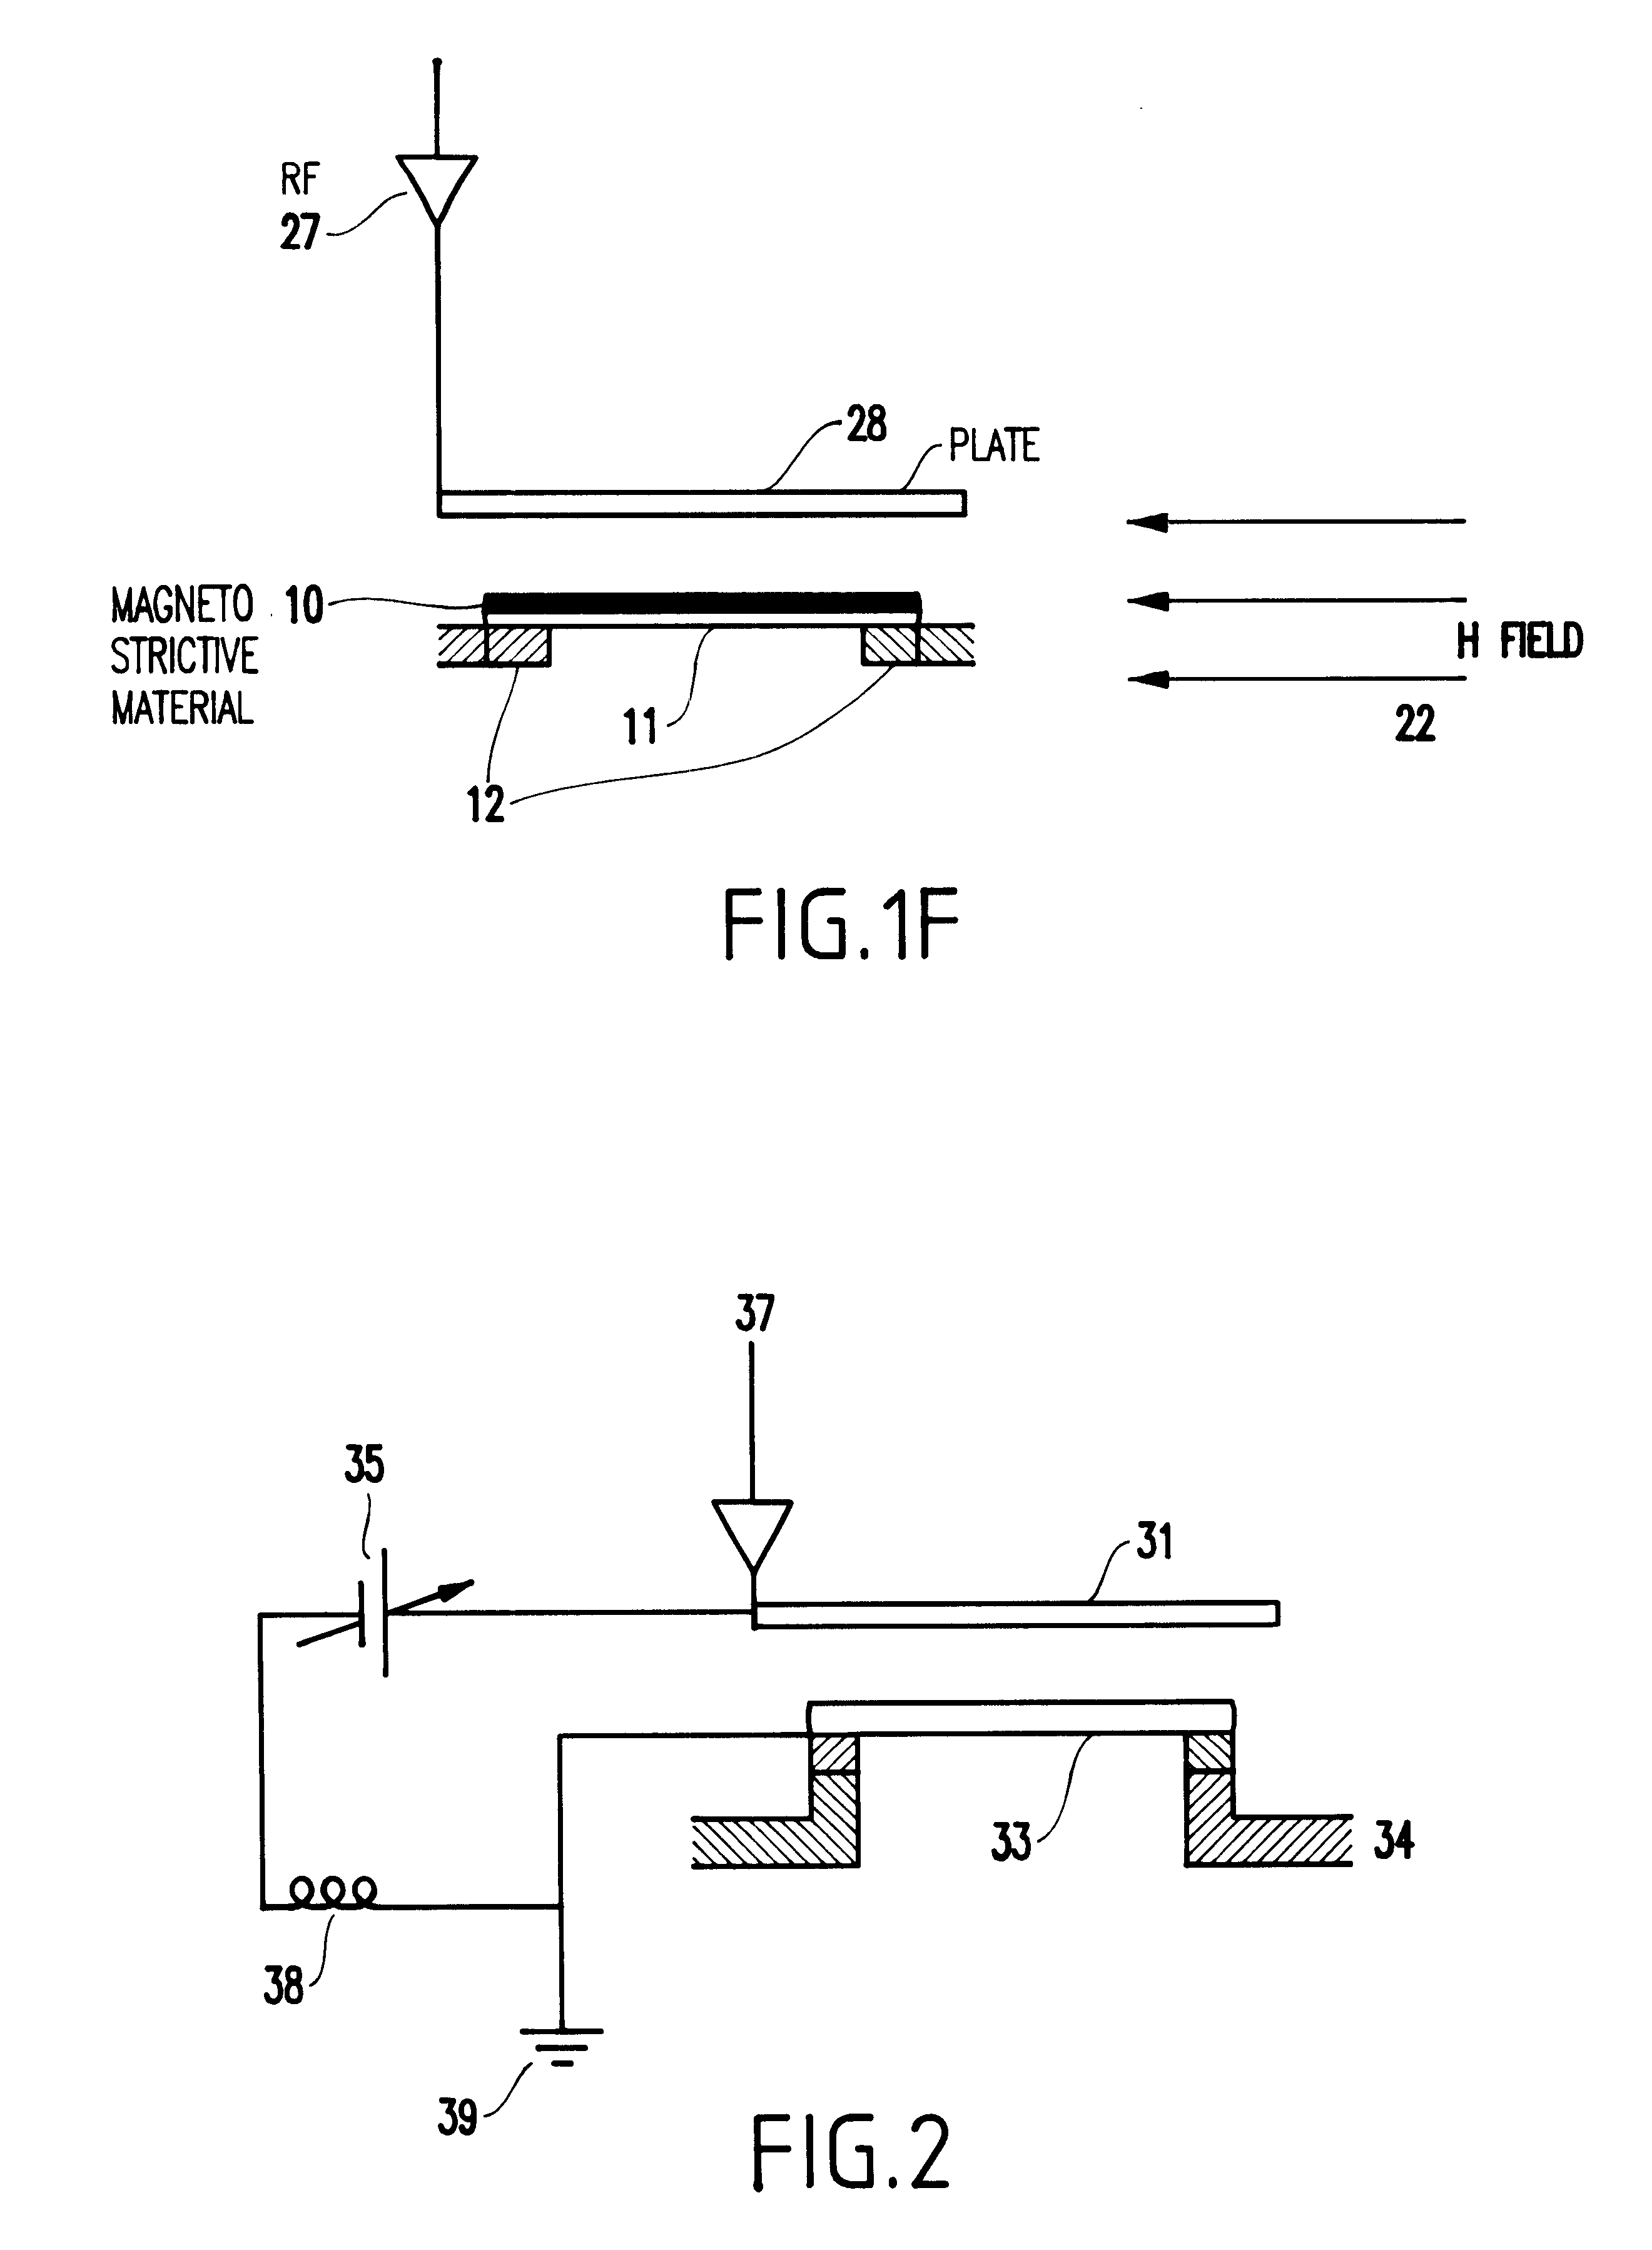 Filter circuit including system for tuning resonant structures to change resonant frequencies thereof